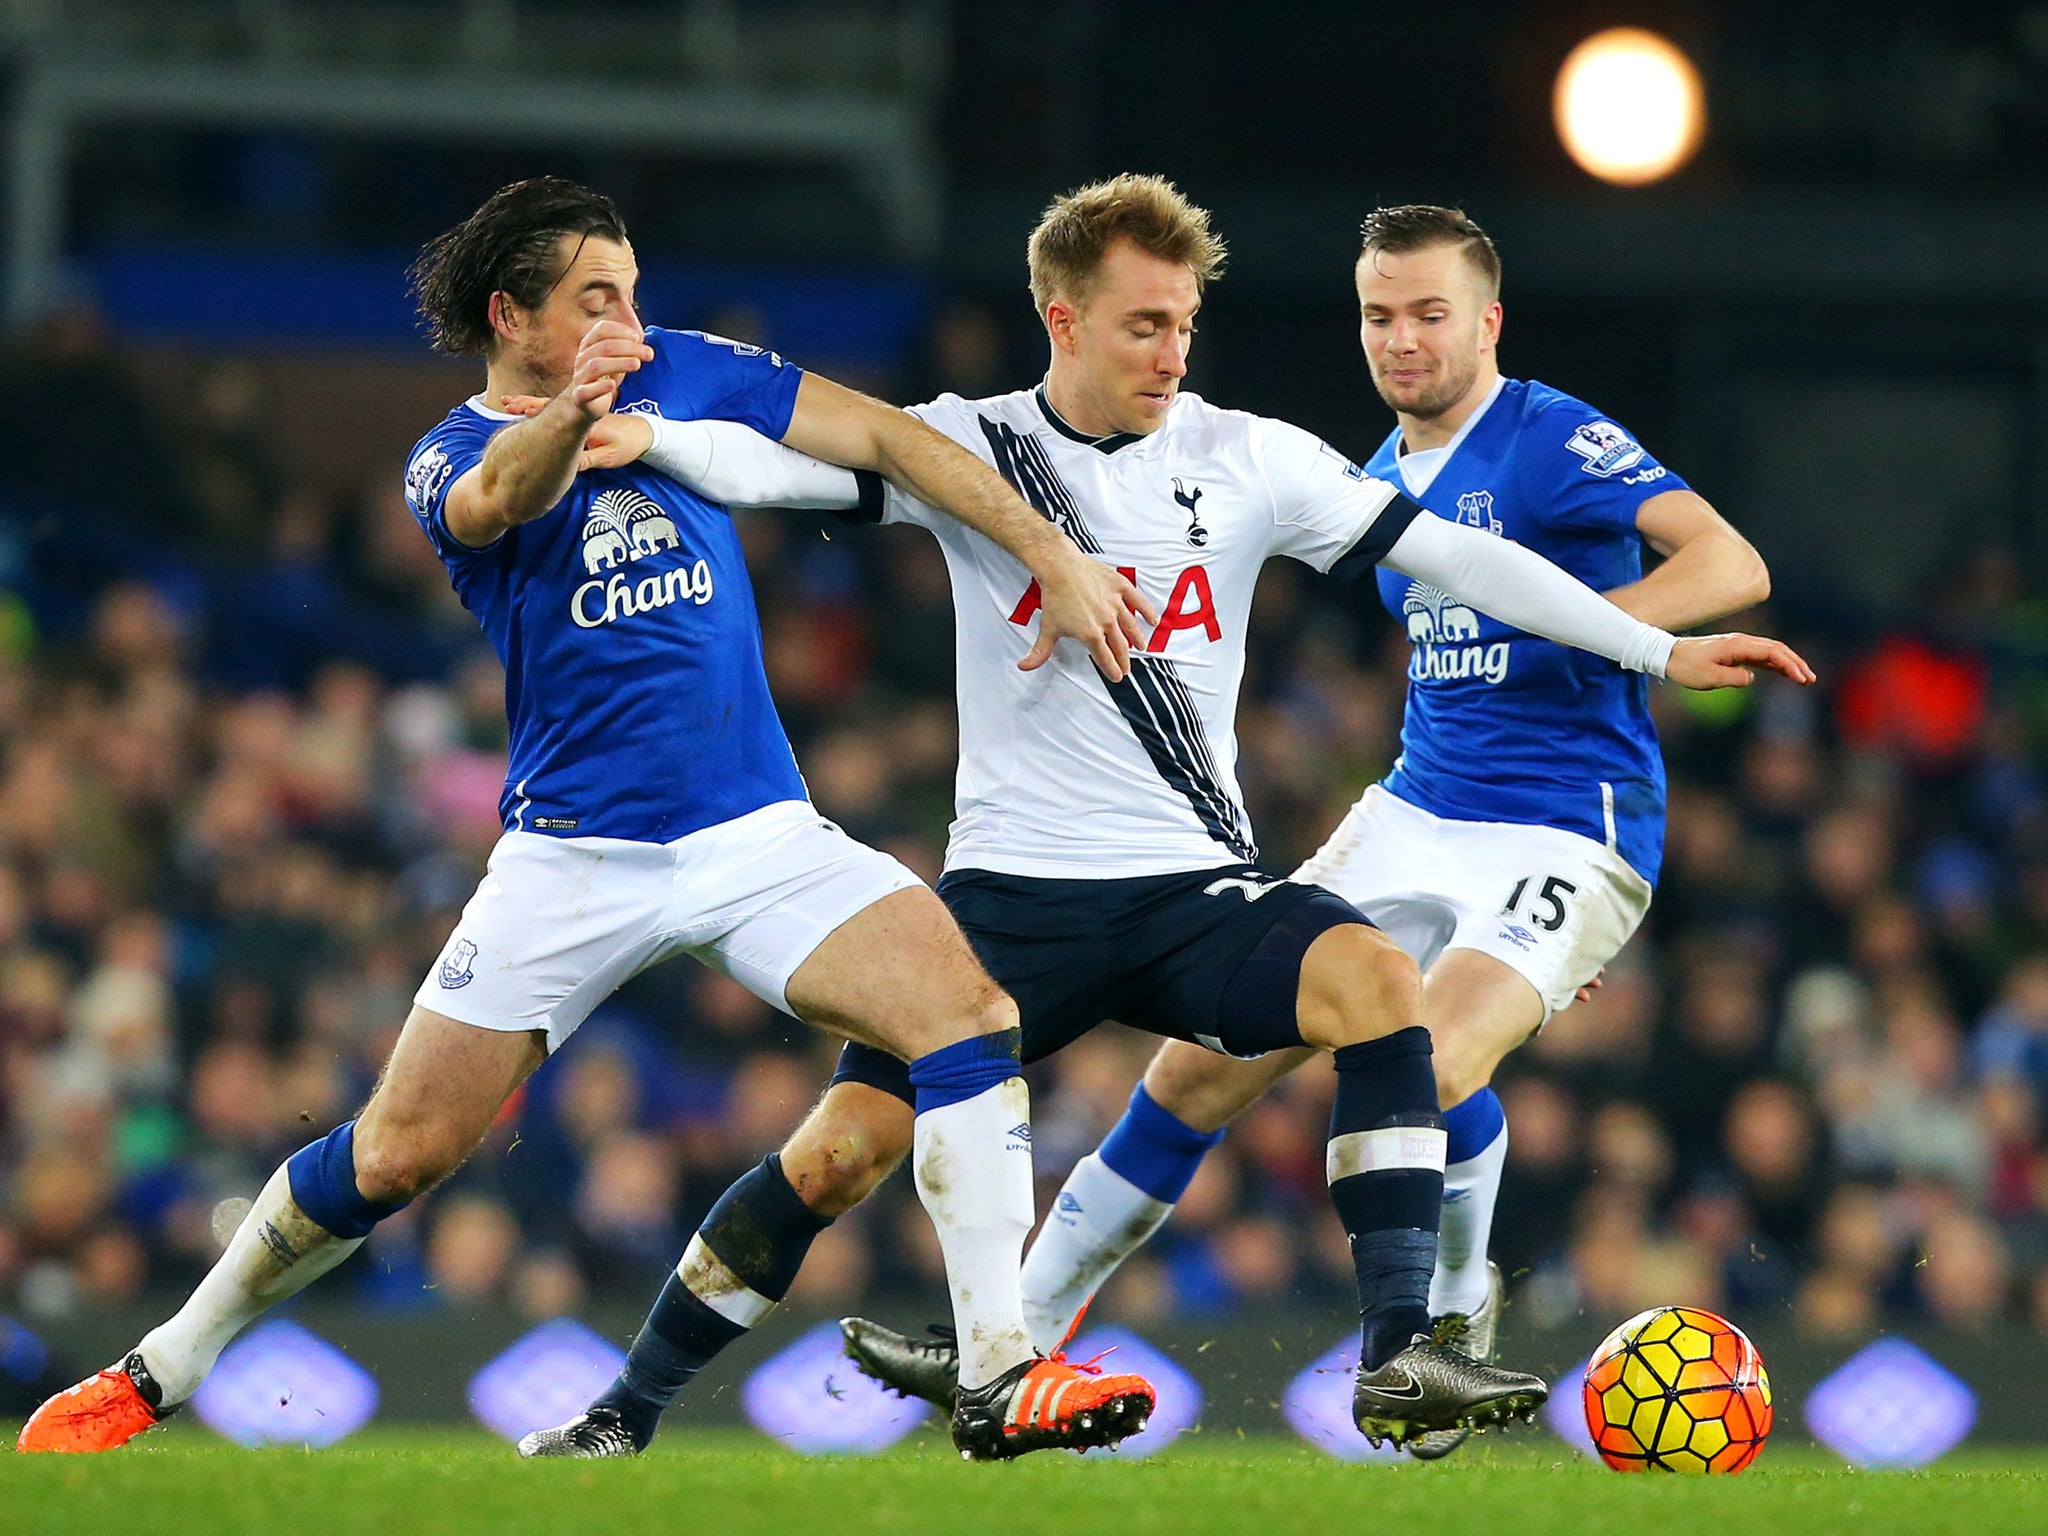 Christian Eriksen and Leighton Baines compete for the ball